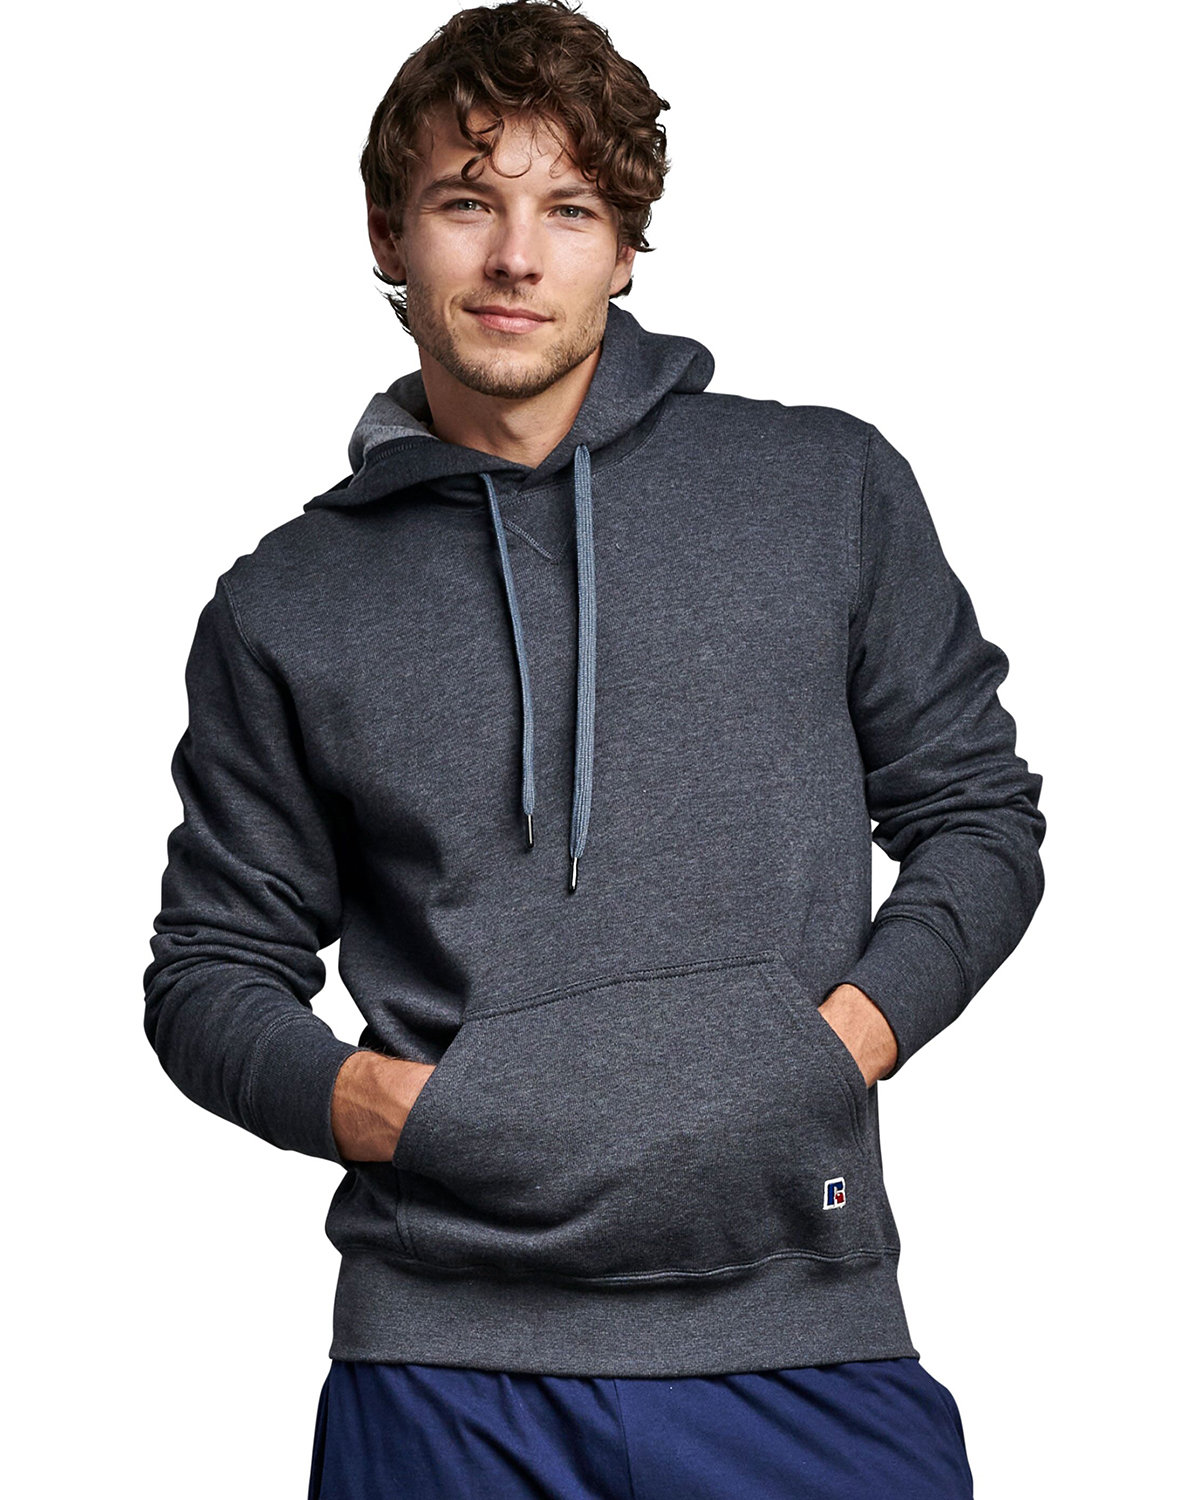 Russell Athletic Unisex Cotton Classic Hooded Sweatshirt CHARCOAL HEATHER 